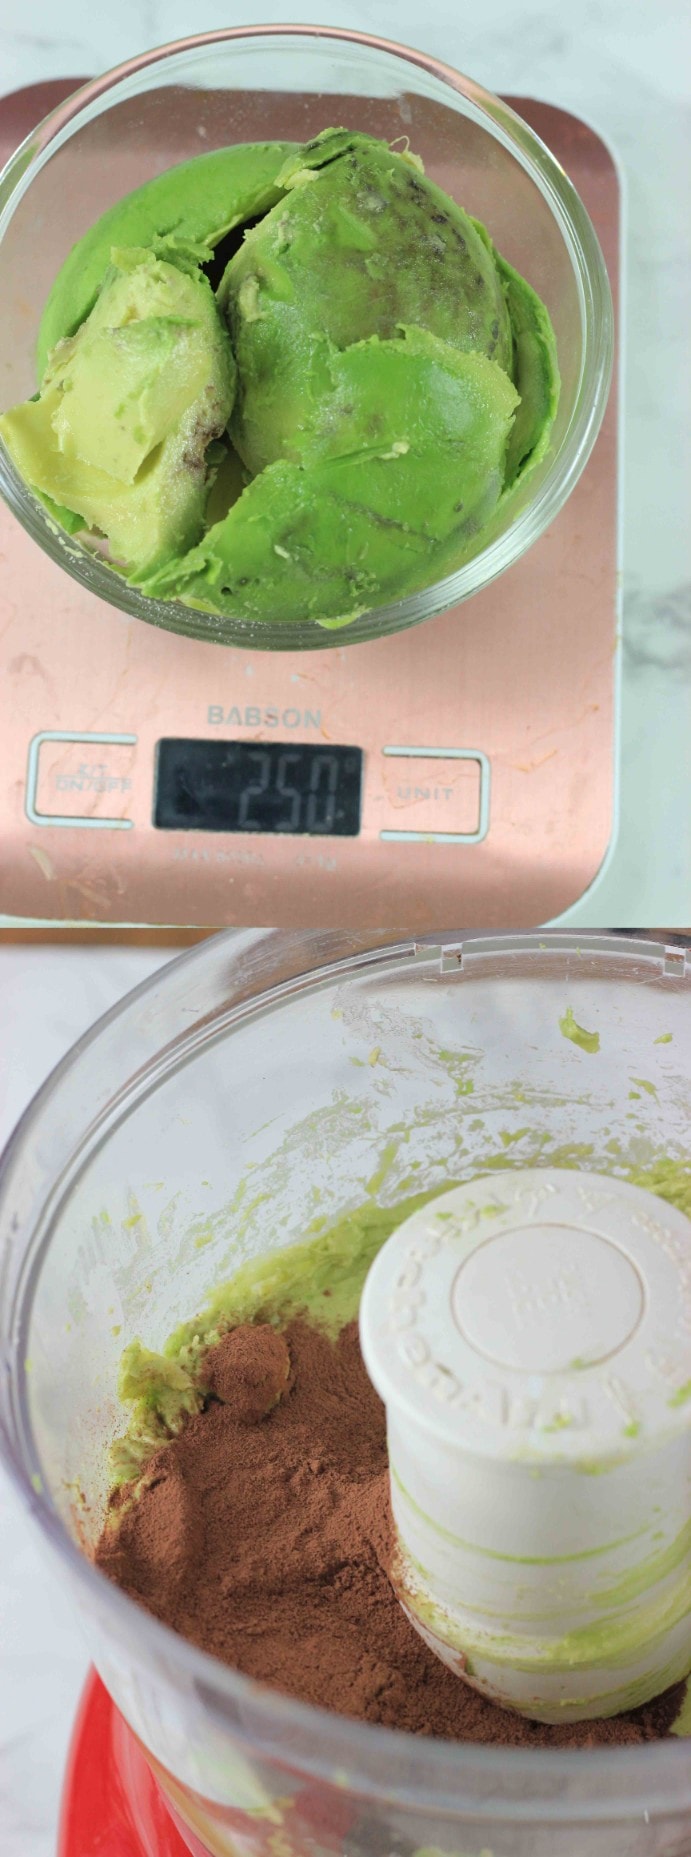 Weigh your avocados when making avocado brownies.